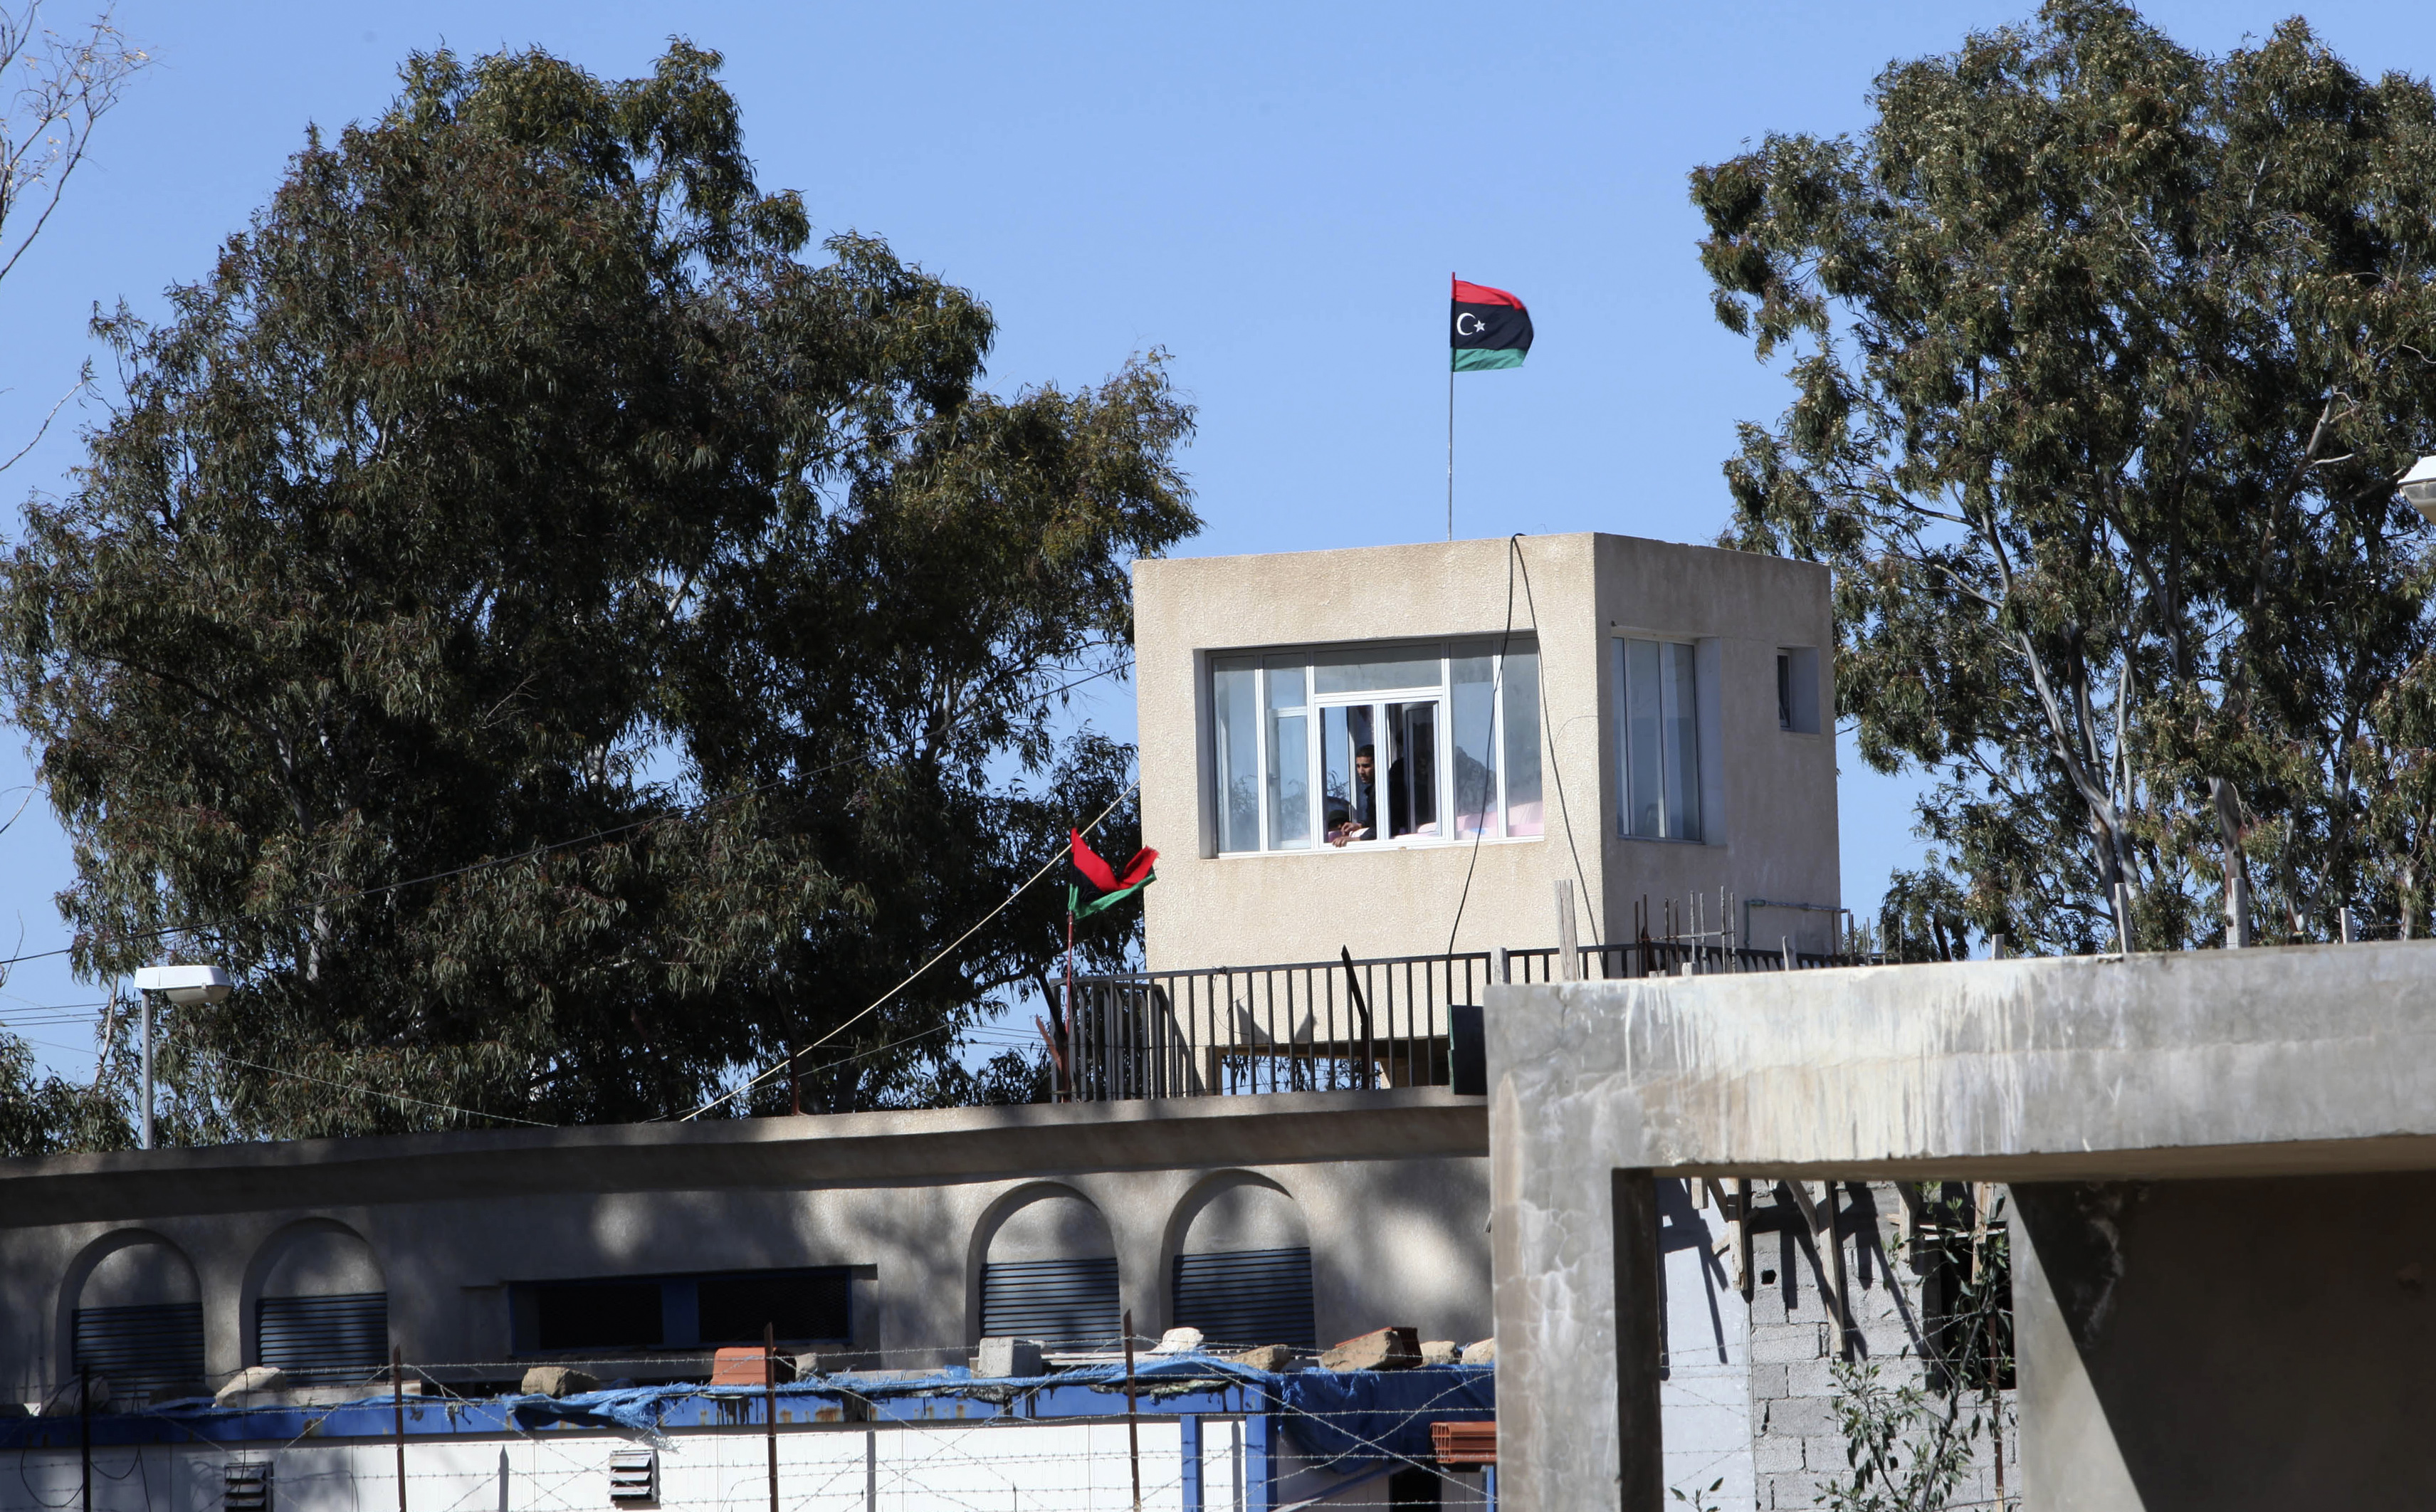 The Ain Zara prison, which was handed over to the Justice Ministry from a Tripoli-based militia, seen in Tripoli, Libya on Feb. 2, 2012. (Ismail Zetouni—Reuters)